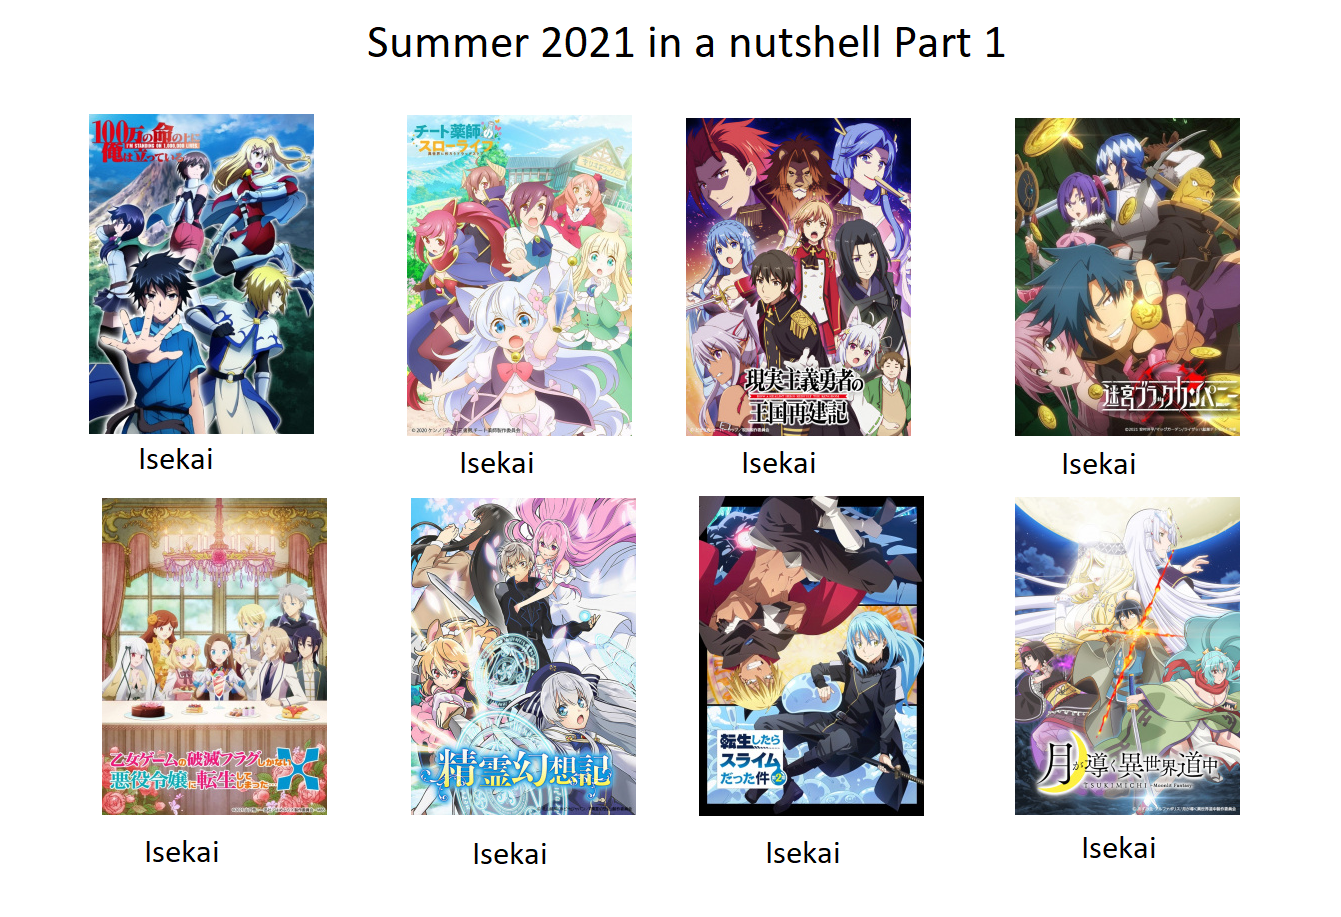 Summer 2021 anime in a nutshell Part 1